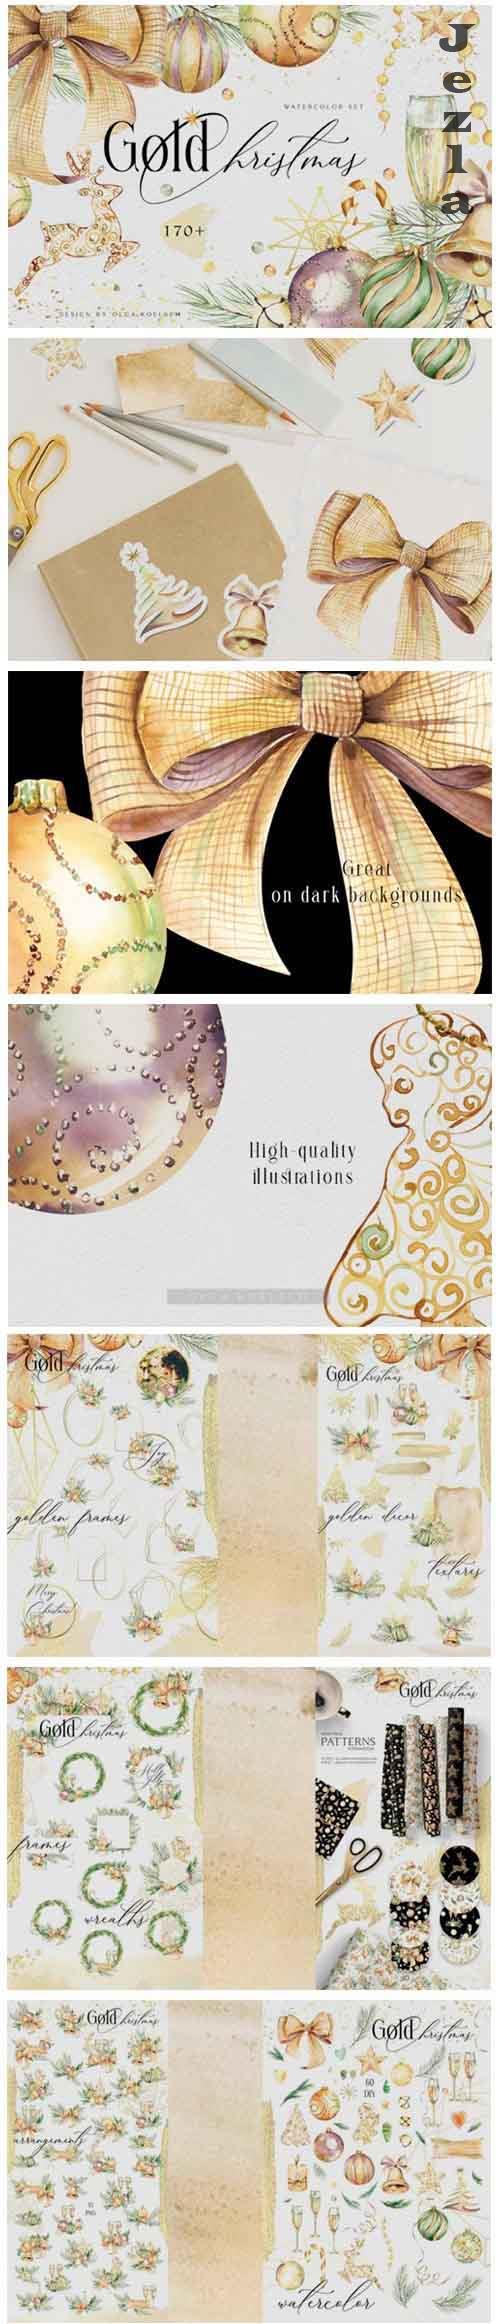 Gold Christmas watercolor collection - 977270